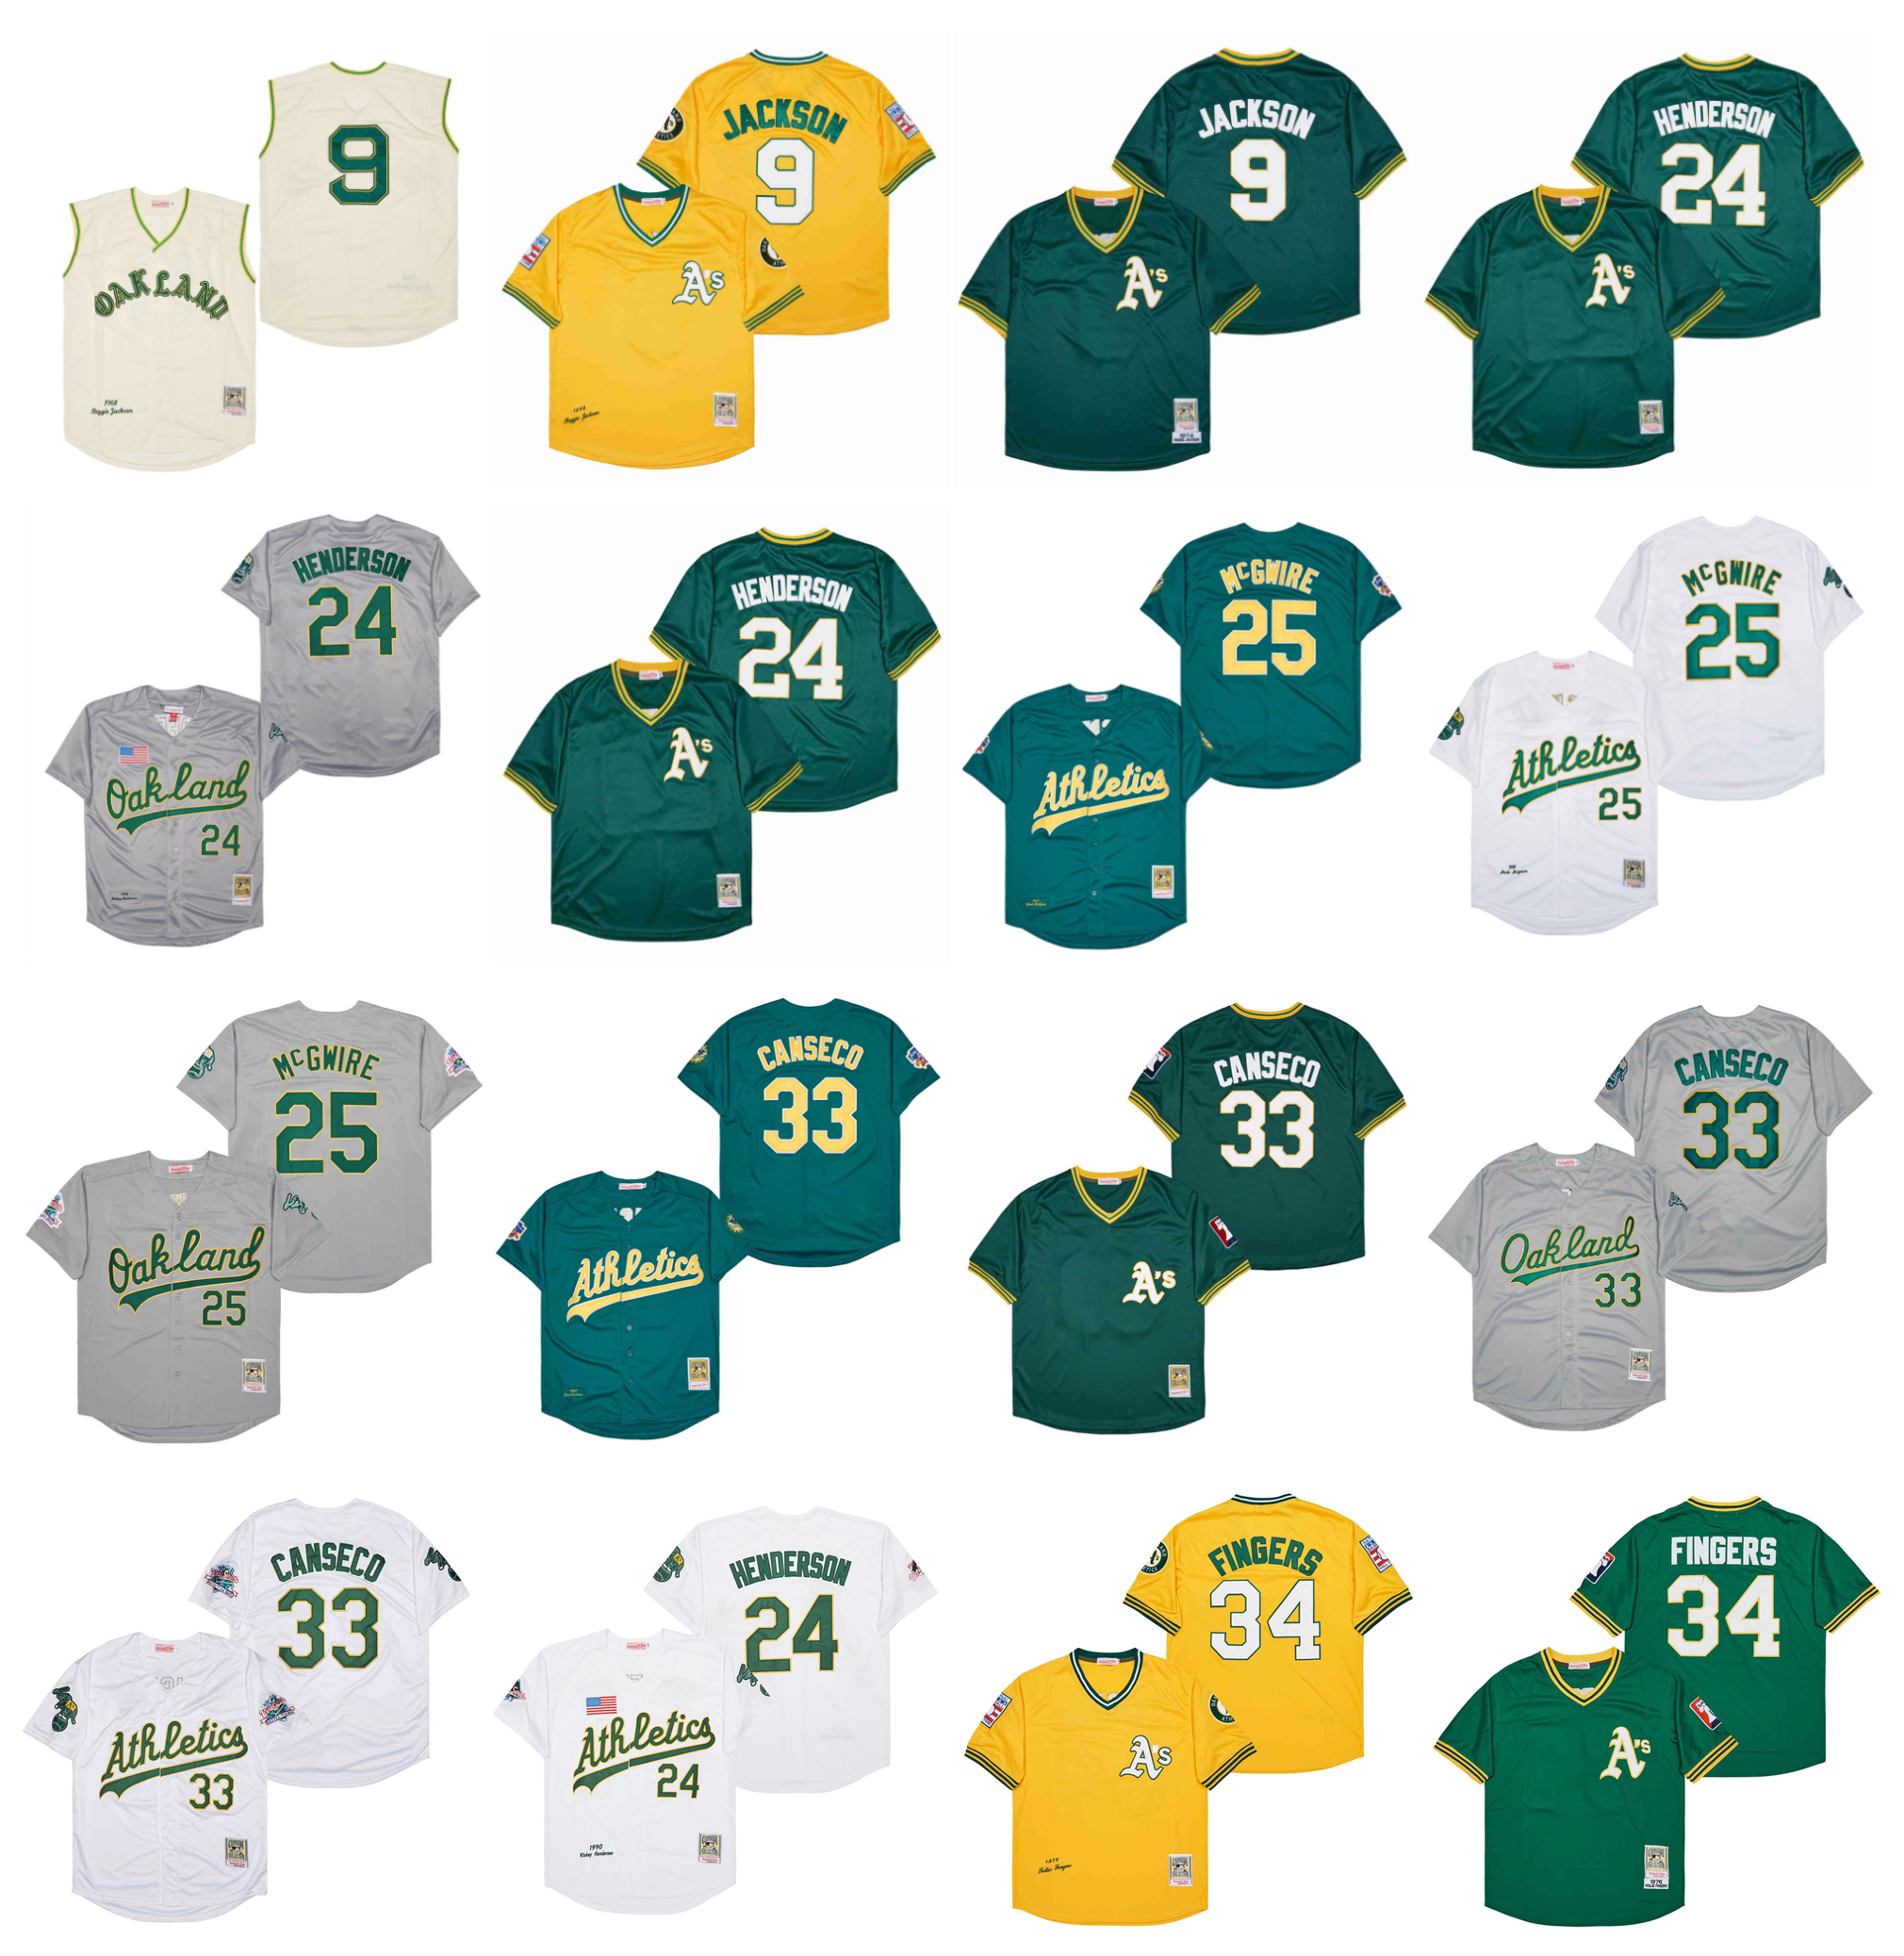 

Mitchell and Ness Throwback Athletics Rickey Henderson Baseball Jersey Oakland Catfish Hunter Reggie Jackson Mark 25 McGwire Jose Canseco Rollie Fingers Size S-4XL, As pic